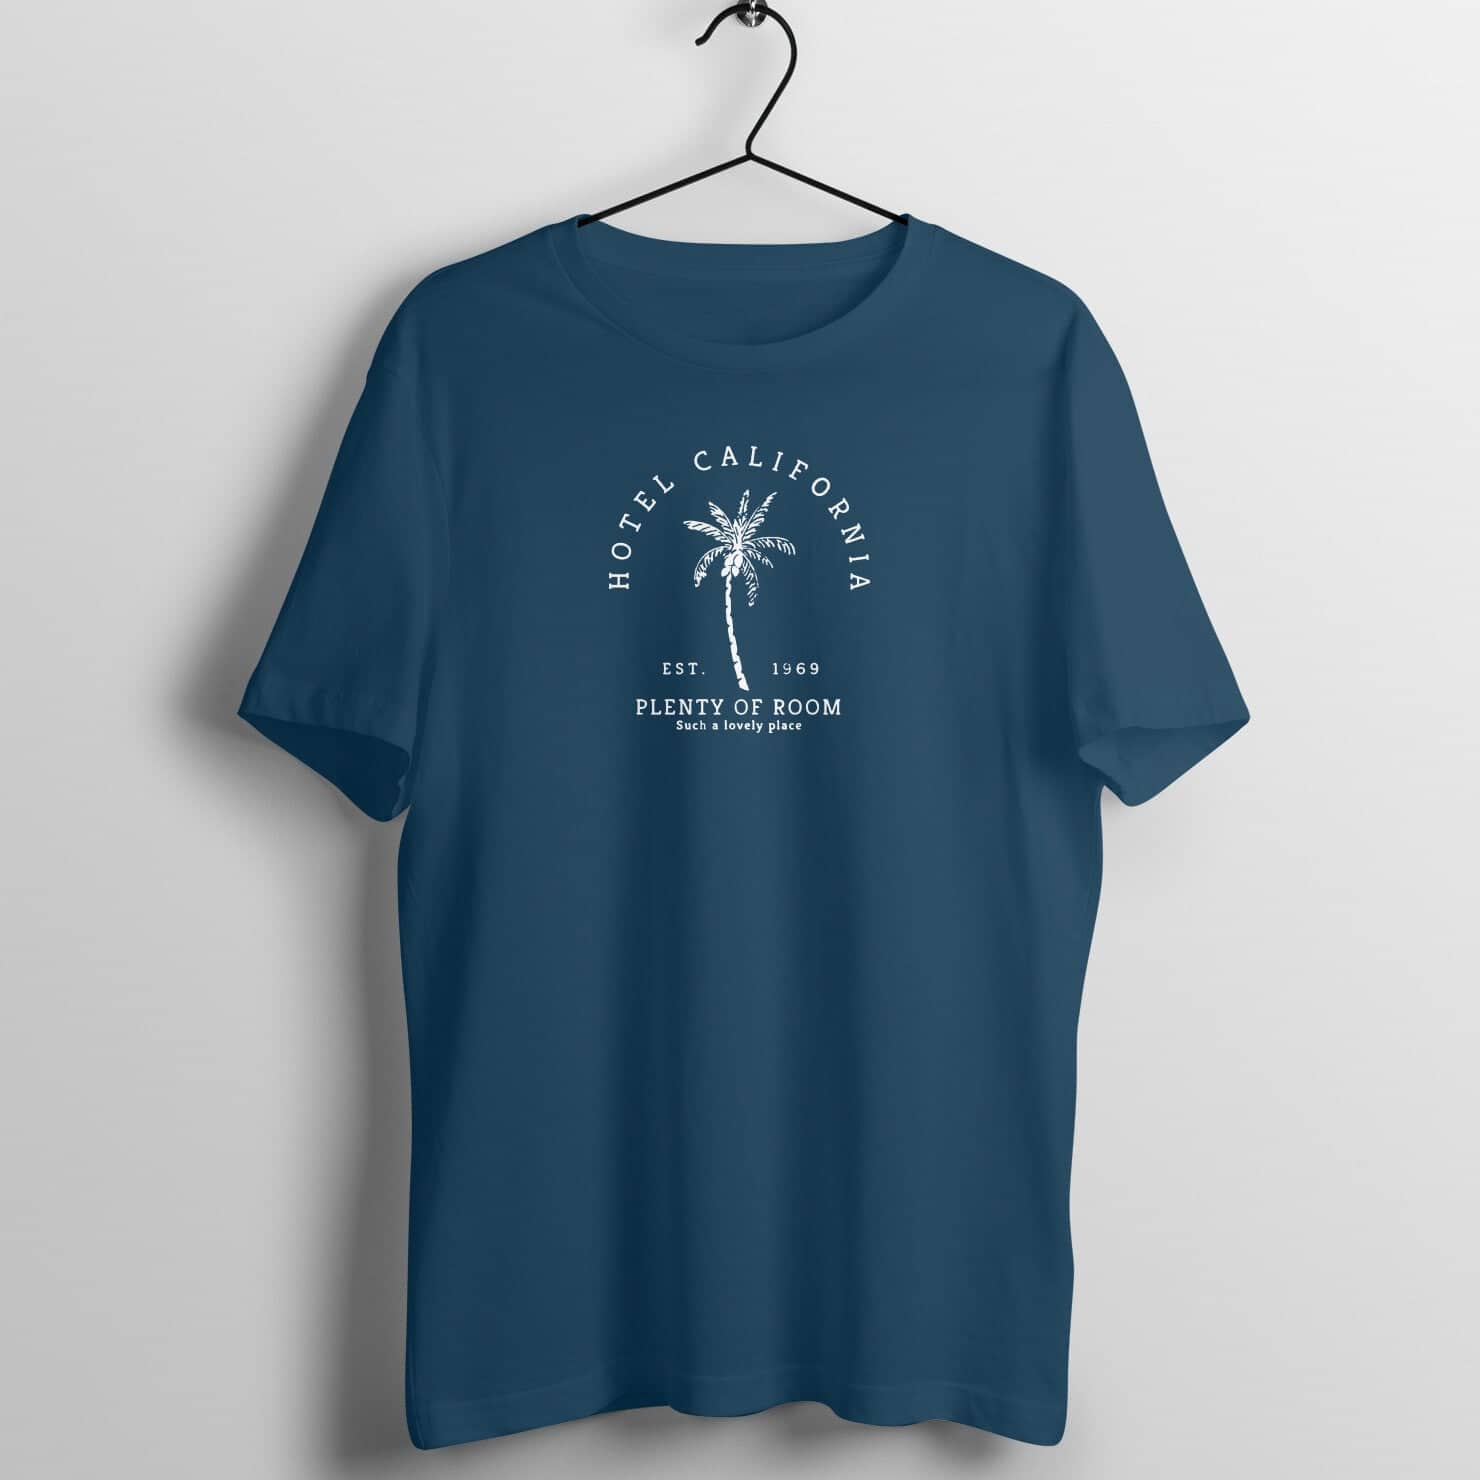 Hotel California Such a Lovely Place Exclusive Navy Blue T Shirt for Men and Women Shirts & Tops Printrove 